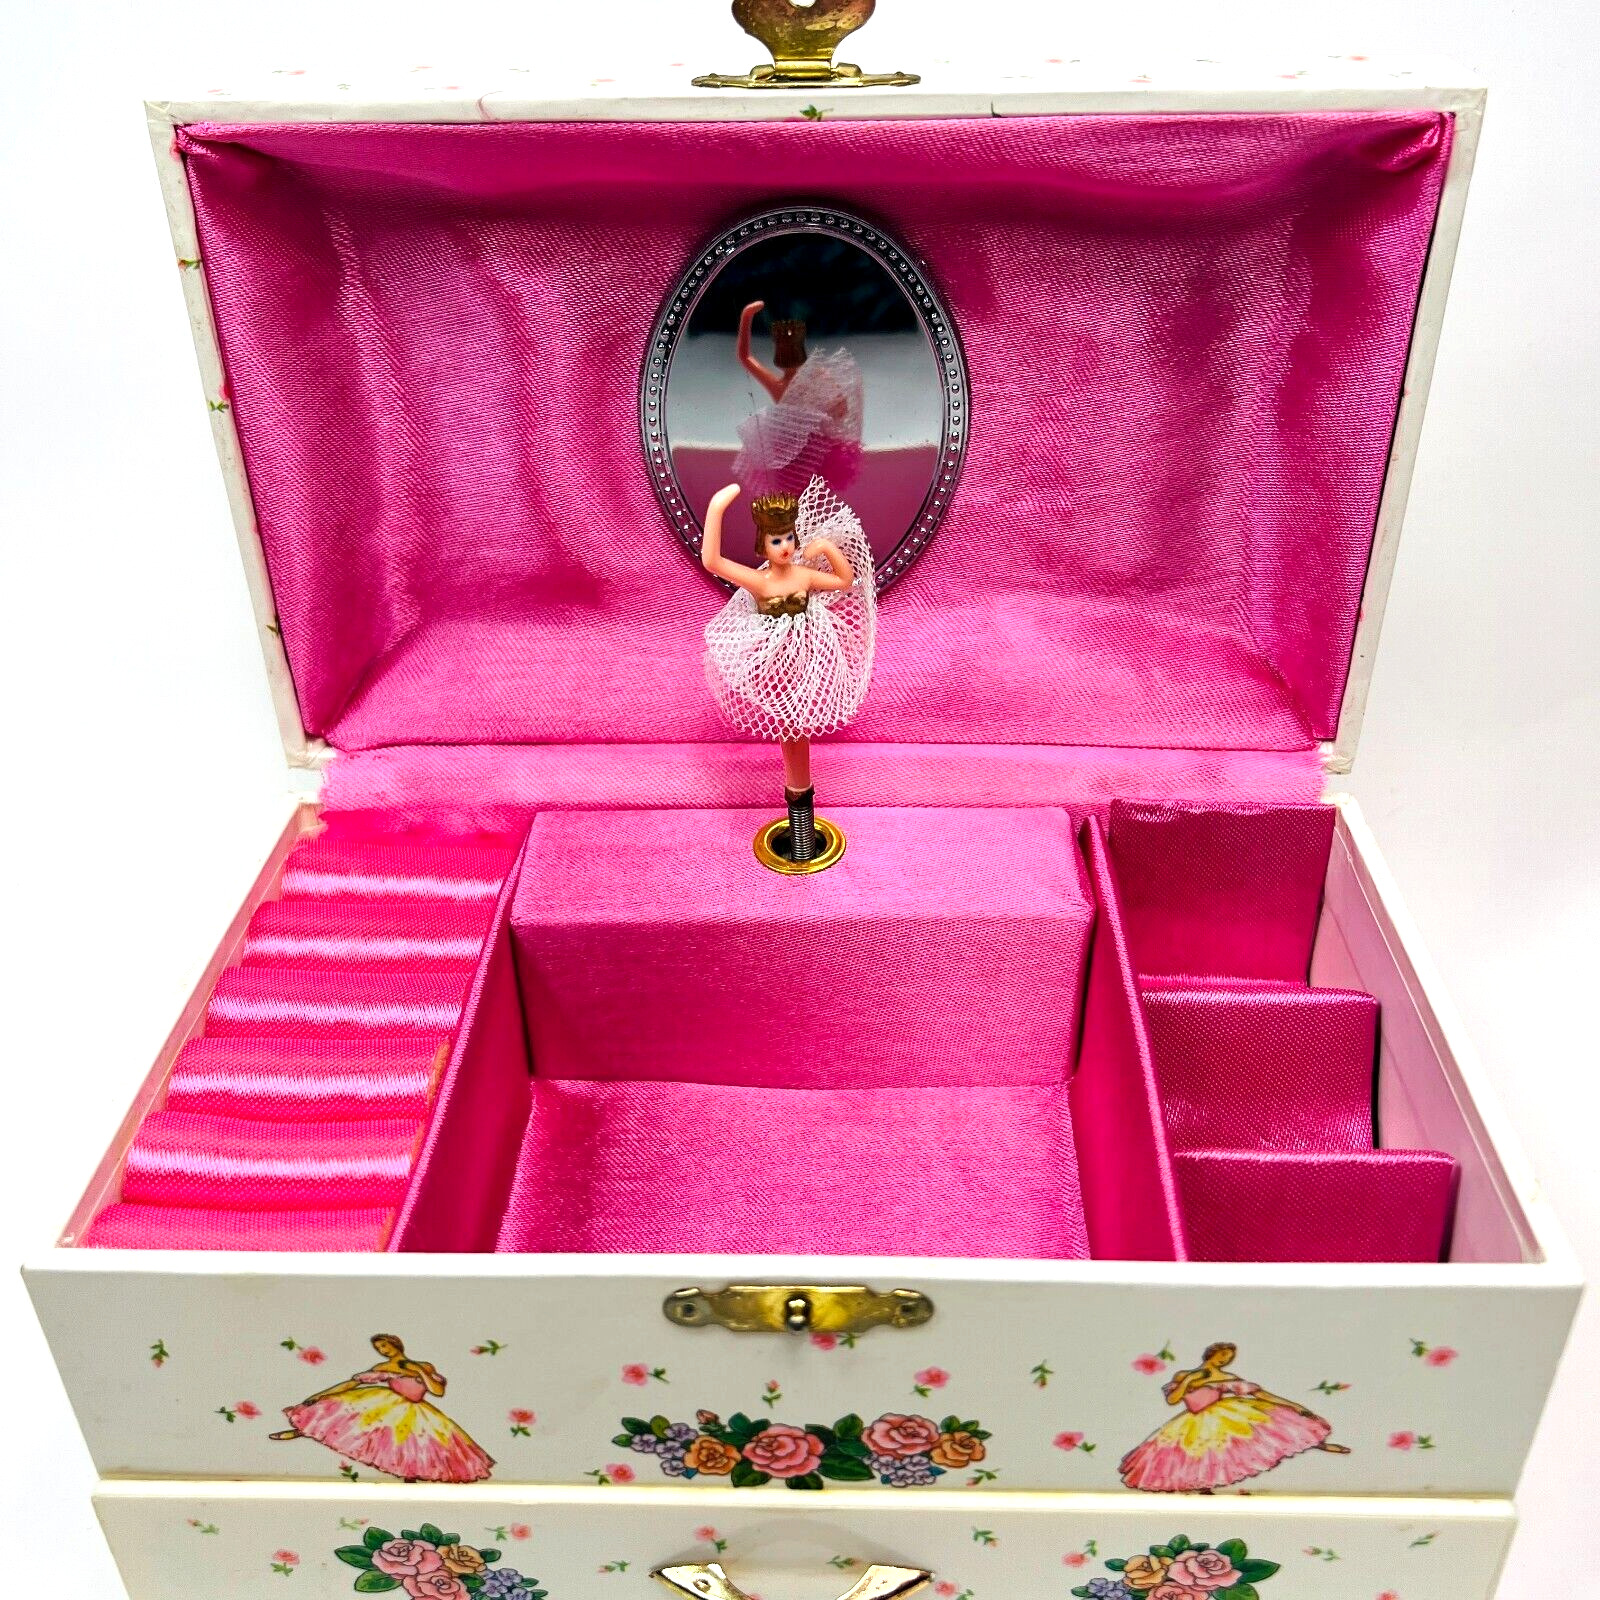 Lillian Vernon  Ballerina Musical Jewelry Box with a Drawer and Pink Lining VTG